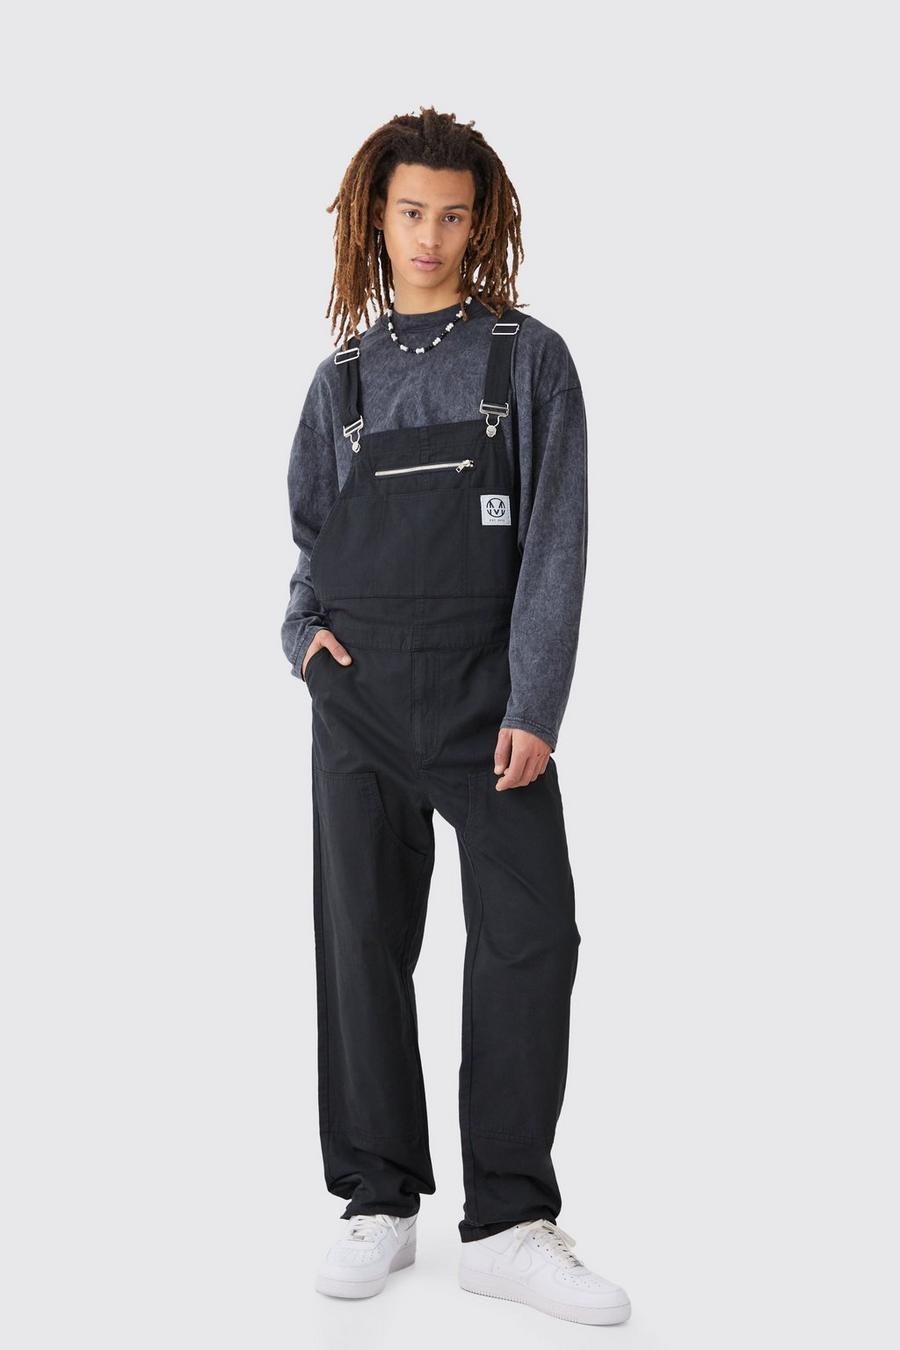 Black Washed Twill Branded Zip Carpenter Relaxed Fit Dungarees